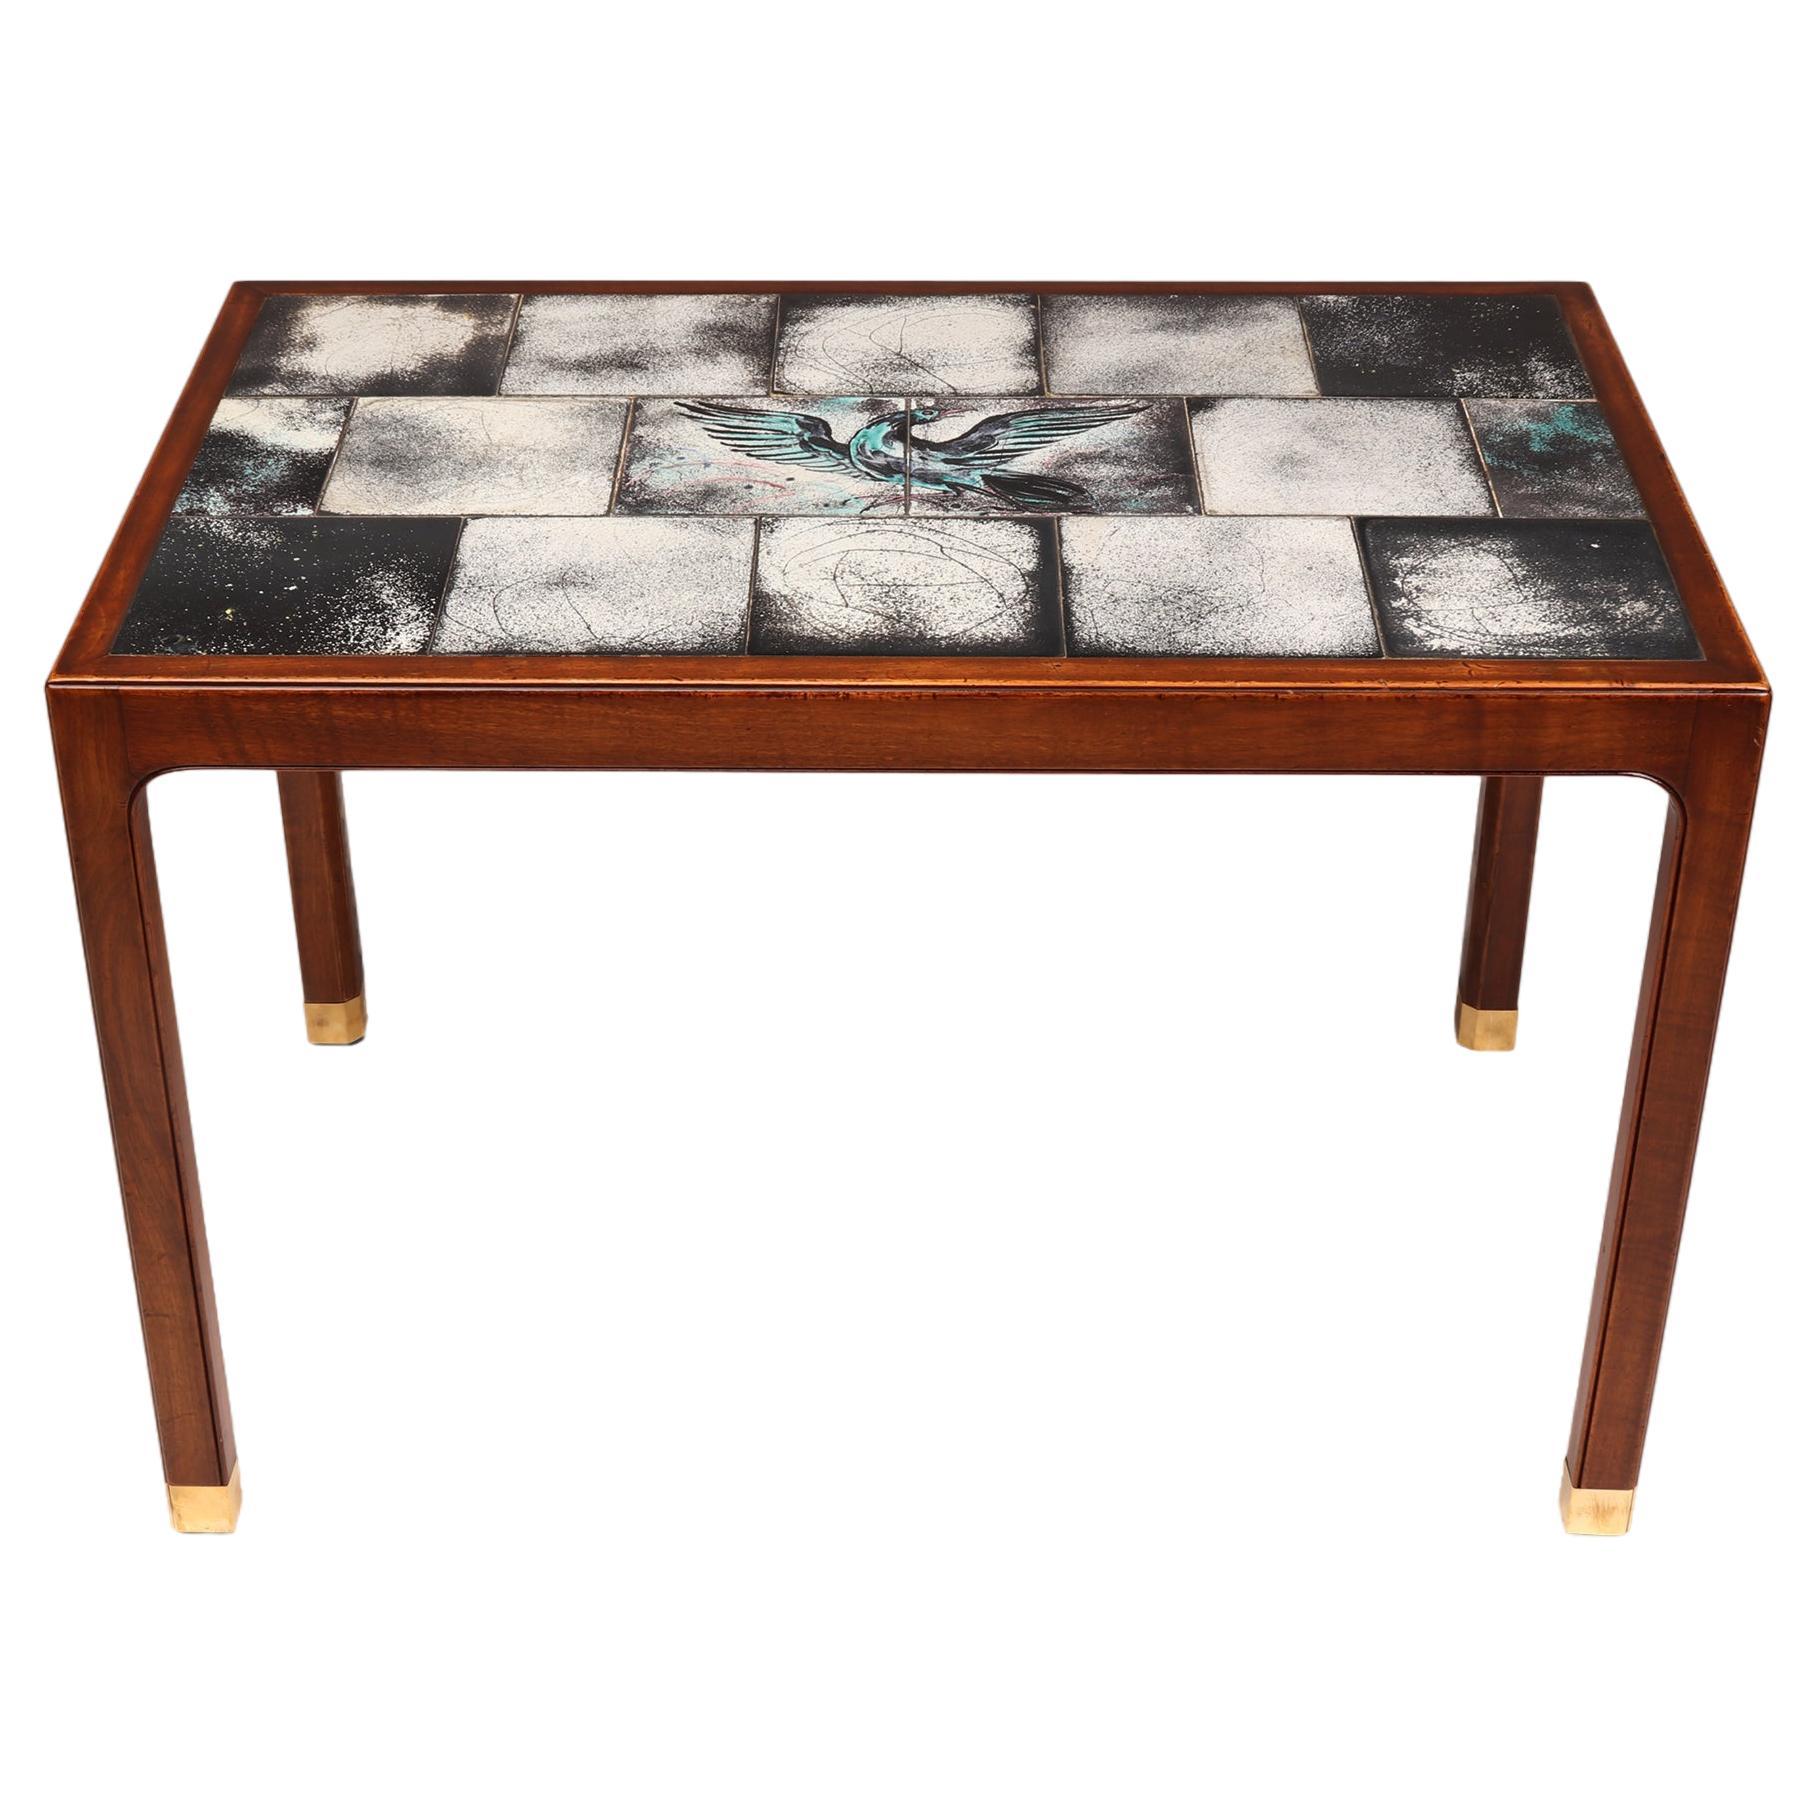 Coffee table with black/white inlaid tiles, turquoise details and brass feet.